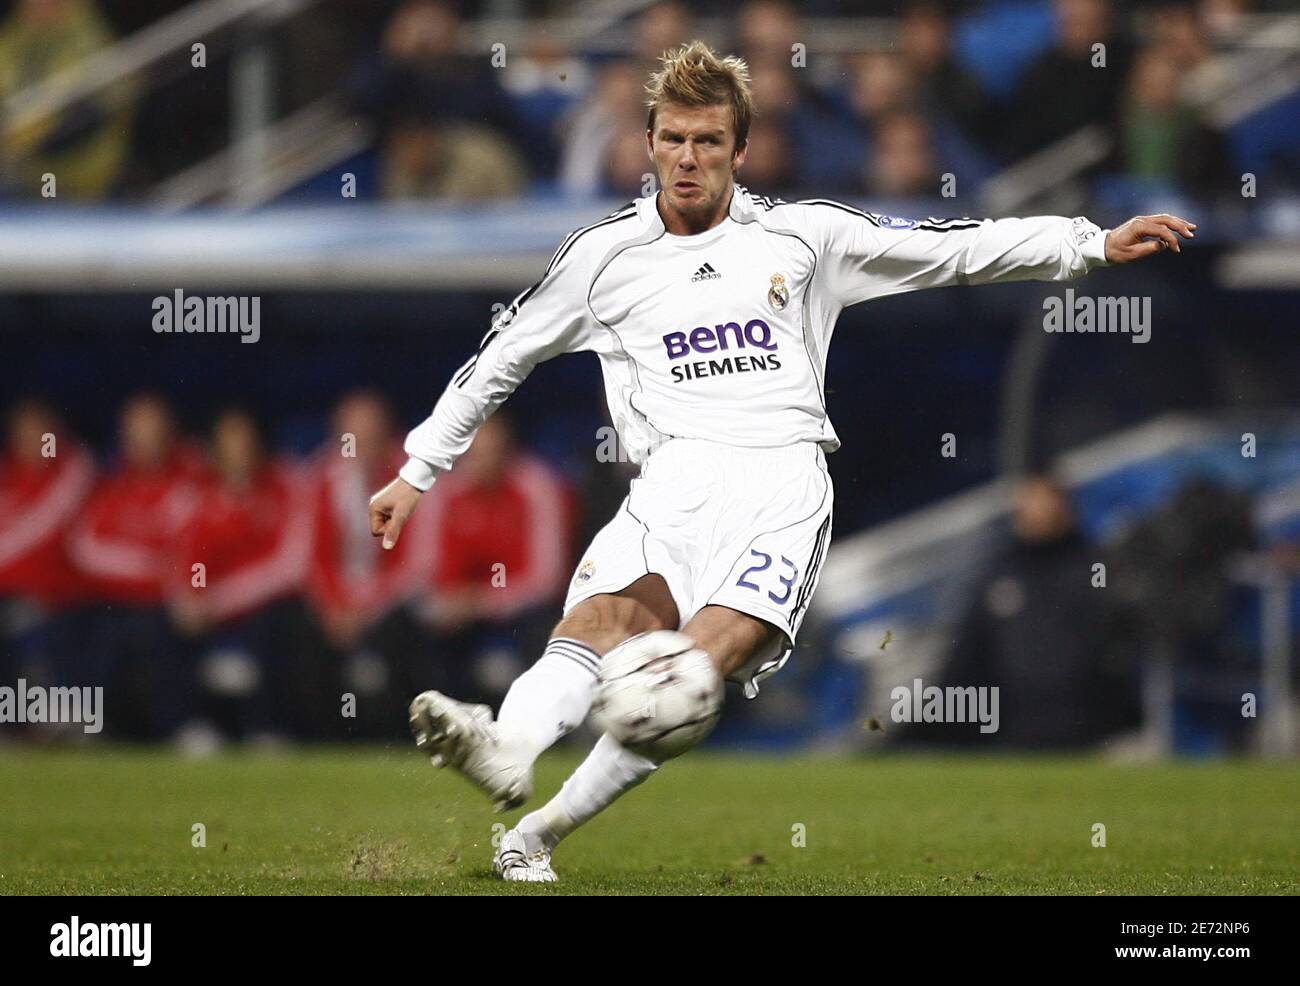 Real Madrid's David Beckham takes a free kick during the Champions League  first knockout round, first leg soccer match, Real Madrid vs Bayern Munich  in Madrid. Real Madrid won 3-2. Photo by